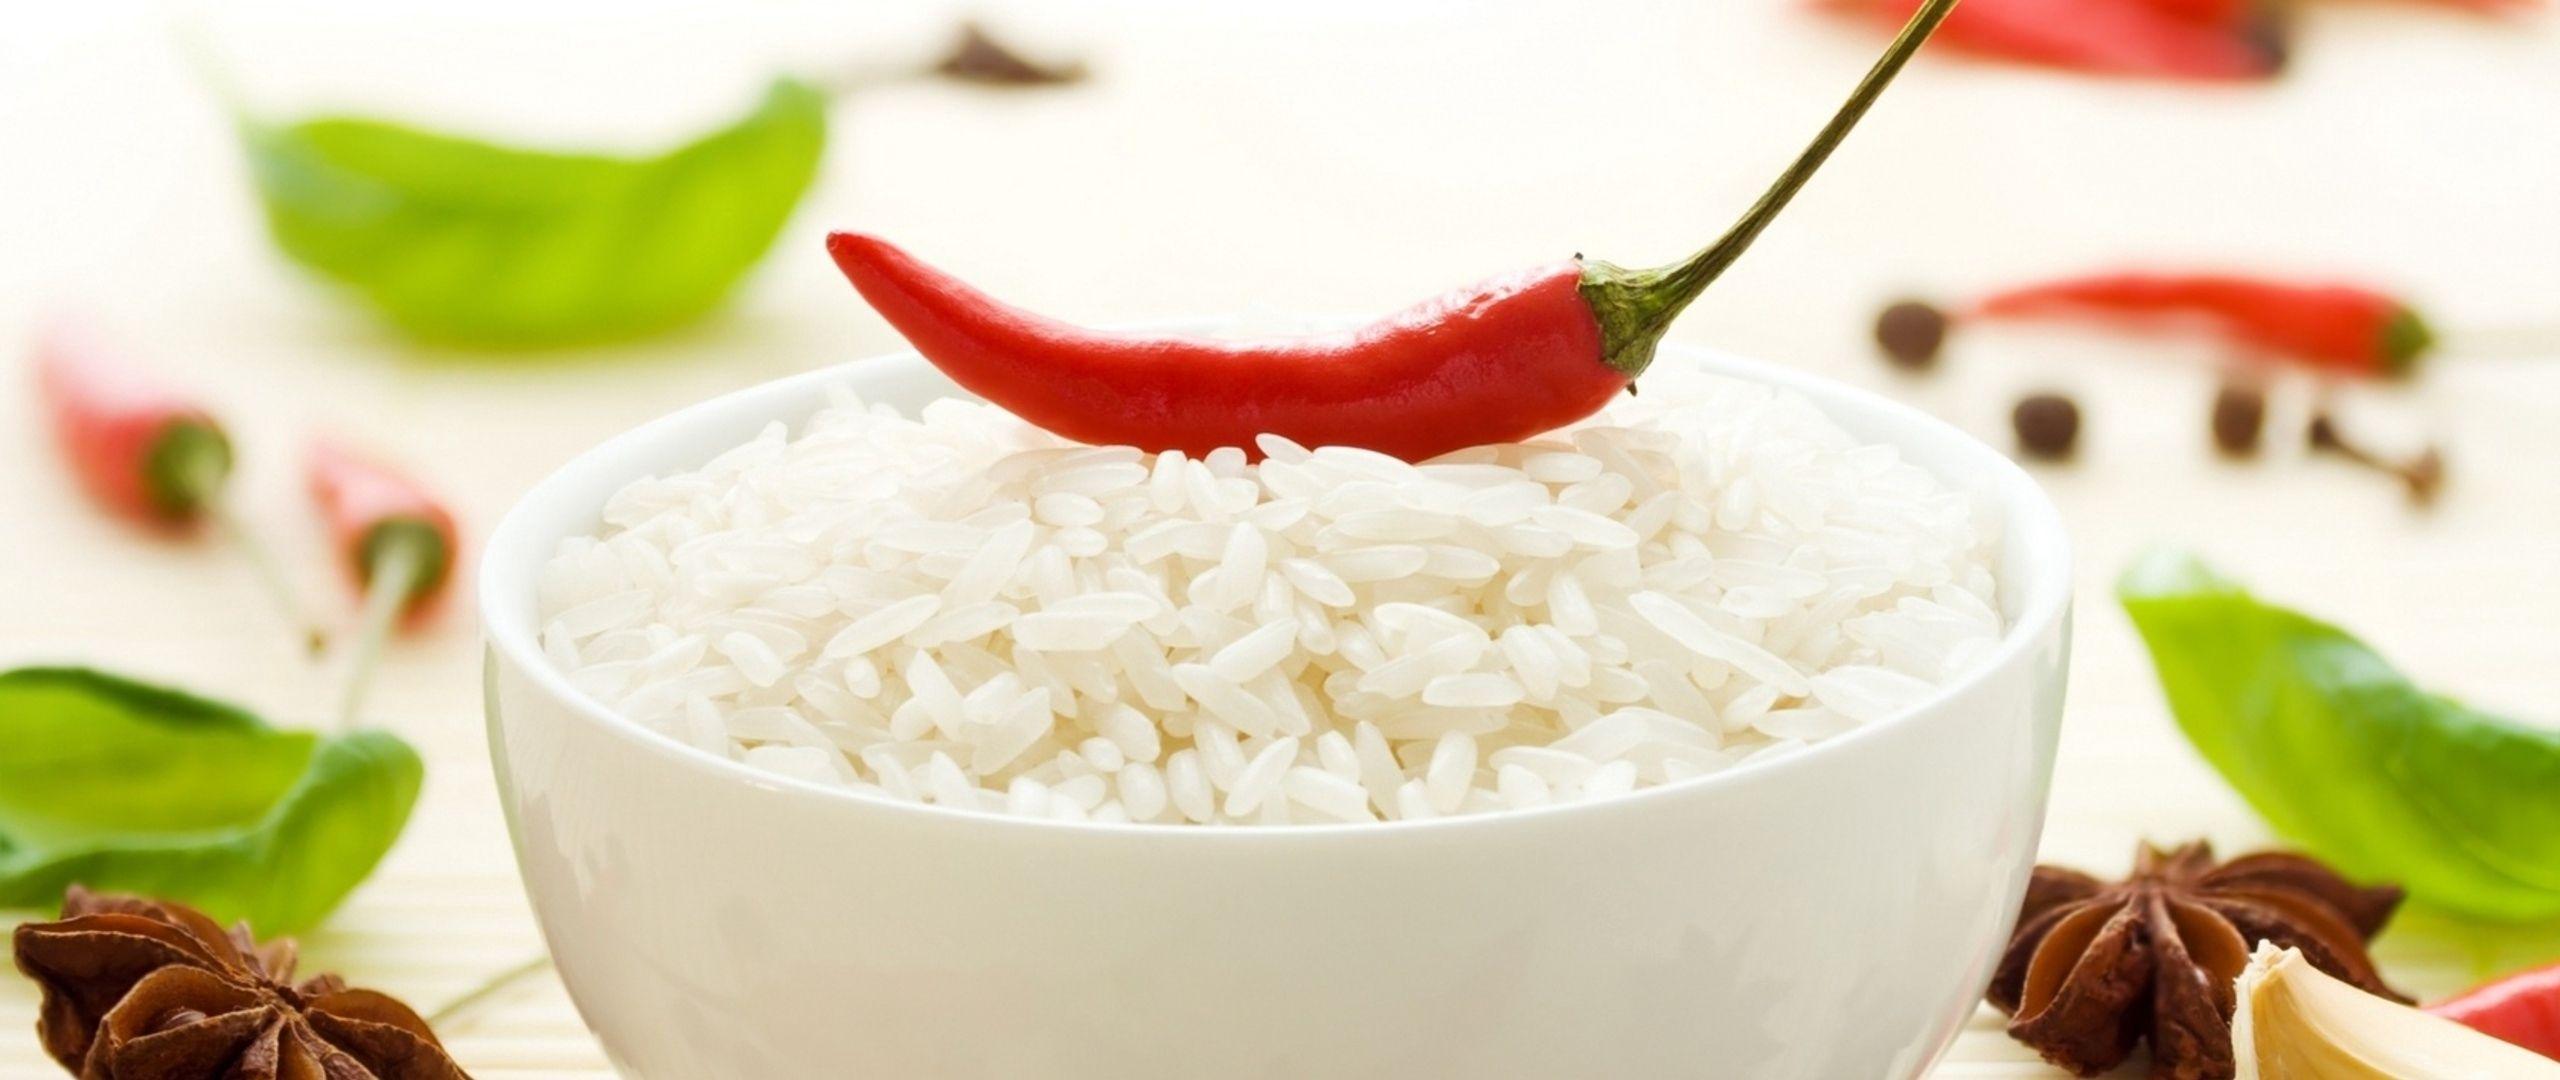 Download wallpaper 2560x1080 rice, pepper, chili, food dual wide